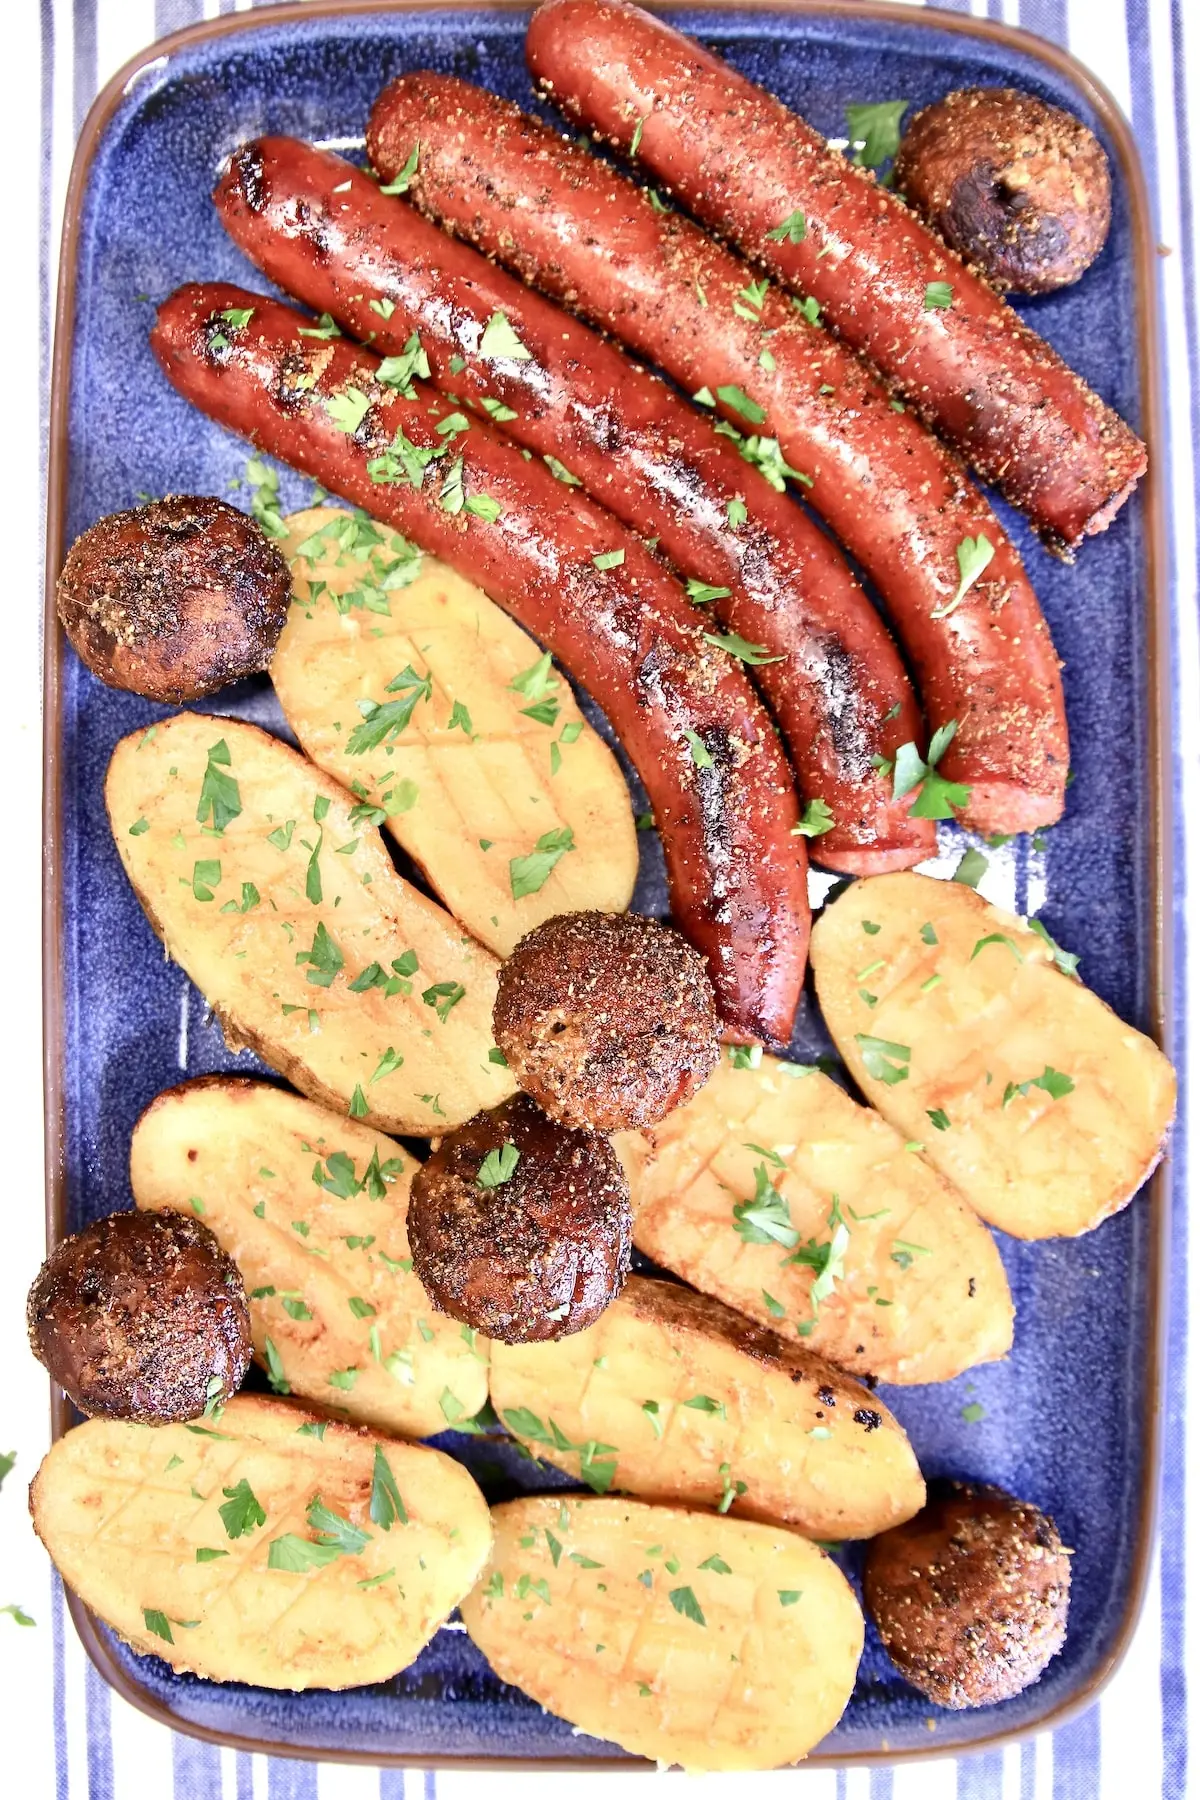 grilled smoked sausage recipes - How to make grilled sausages better